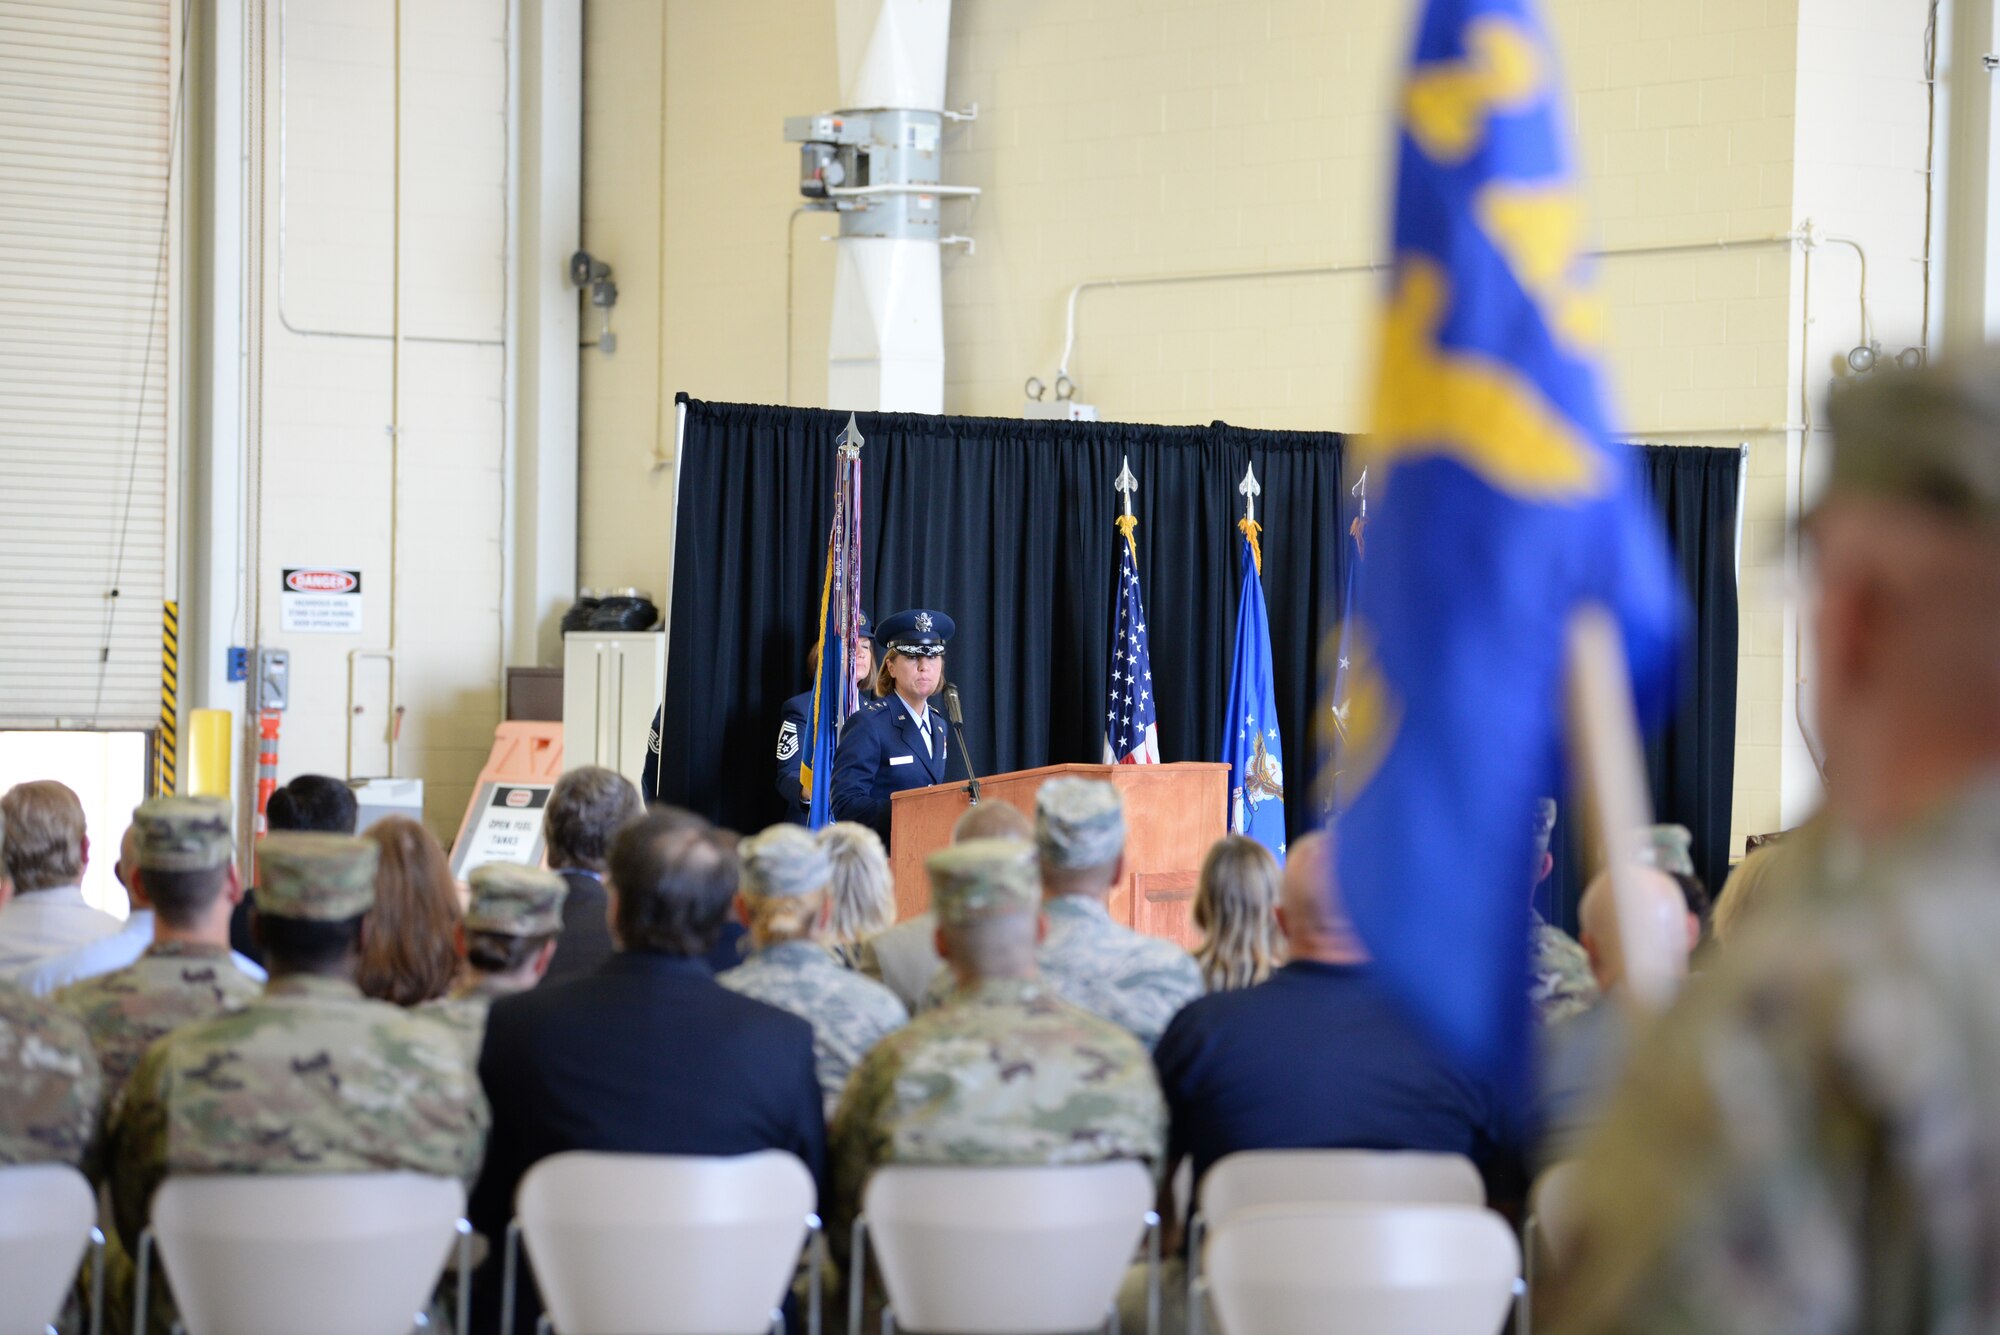 U.S. Air Force Maj. Gen. Andrea Tullos, Second Air Force  commander, delivers remarks during the Second Air Force change of command ceremony on Keesler Air Force Base, Mississippi, Aug. 29, 2019. The ceremony is a symbol of command being exchanged from one commander to the next. Tullos assumed command of the Second Air Force from Maj. Gen. Timothy Leahy. (U.S. Air Force photo by
Airman 1st Class Spencer Tobler)